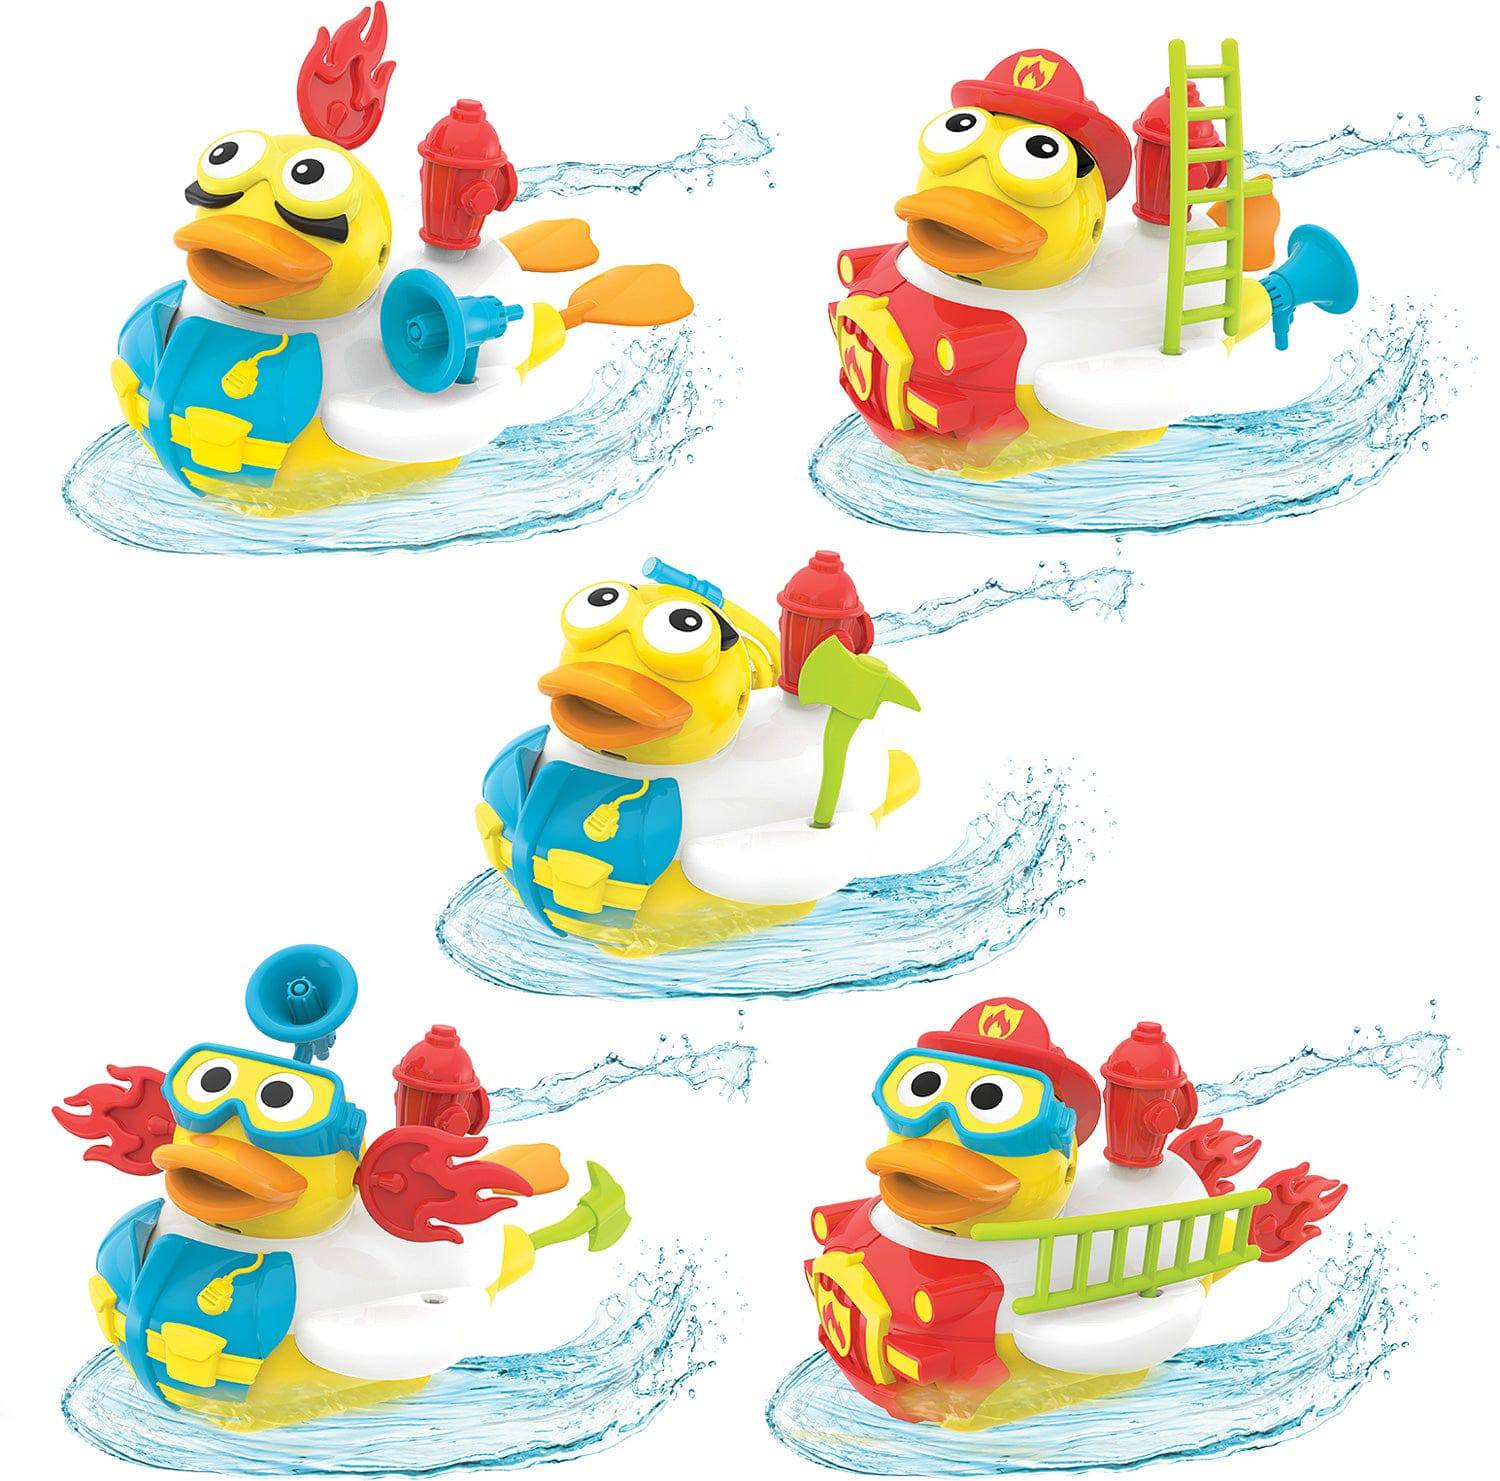 Jet Duck - Create A Firefighter - A Child's Delight